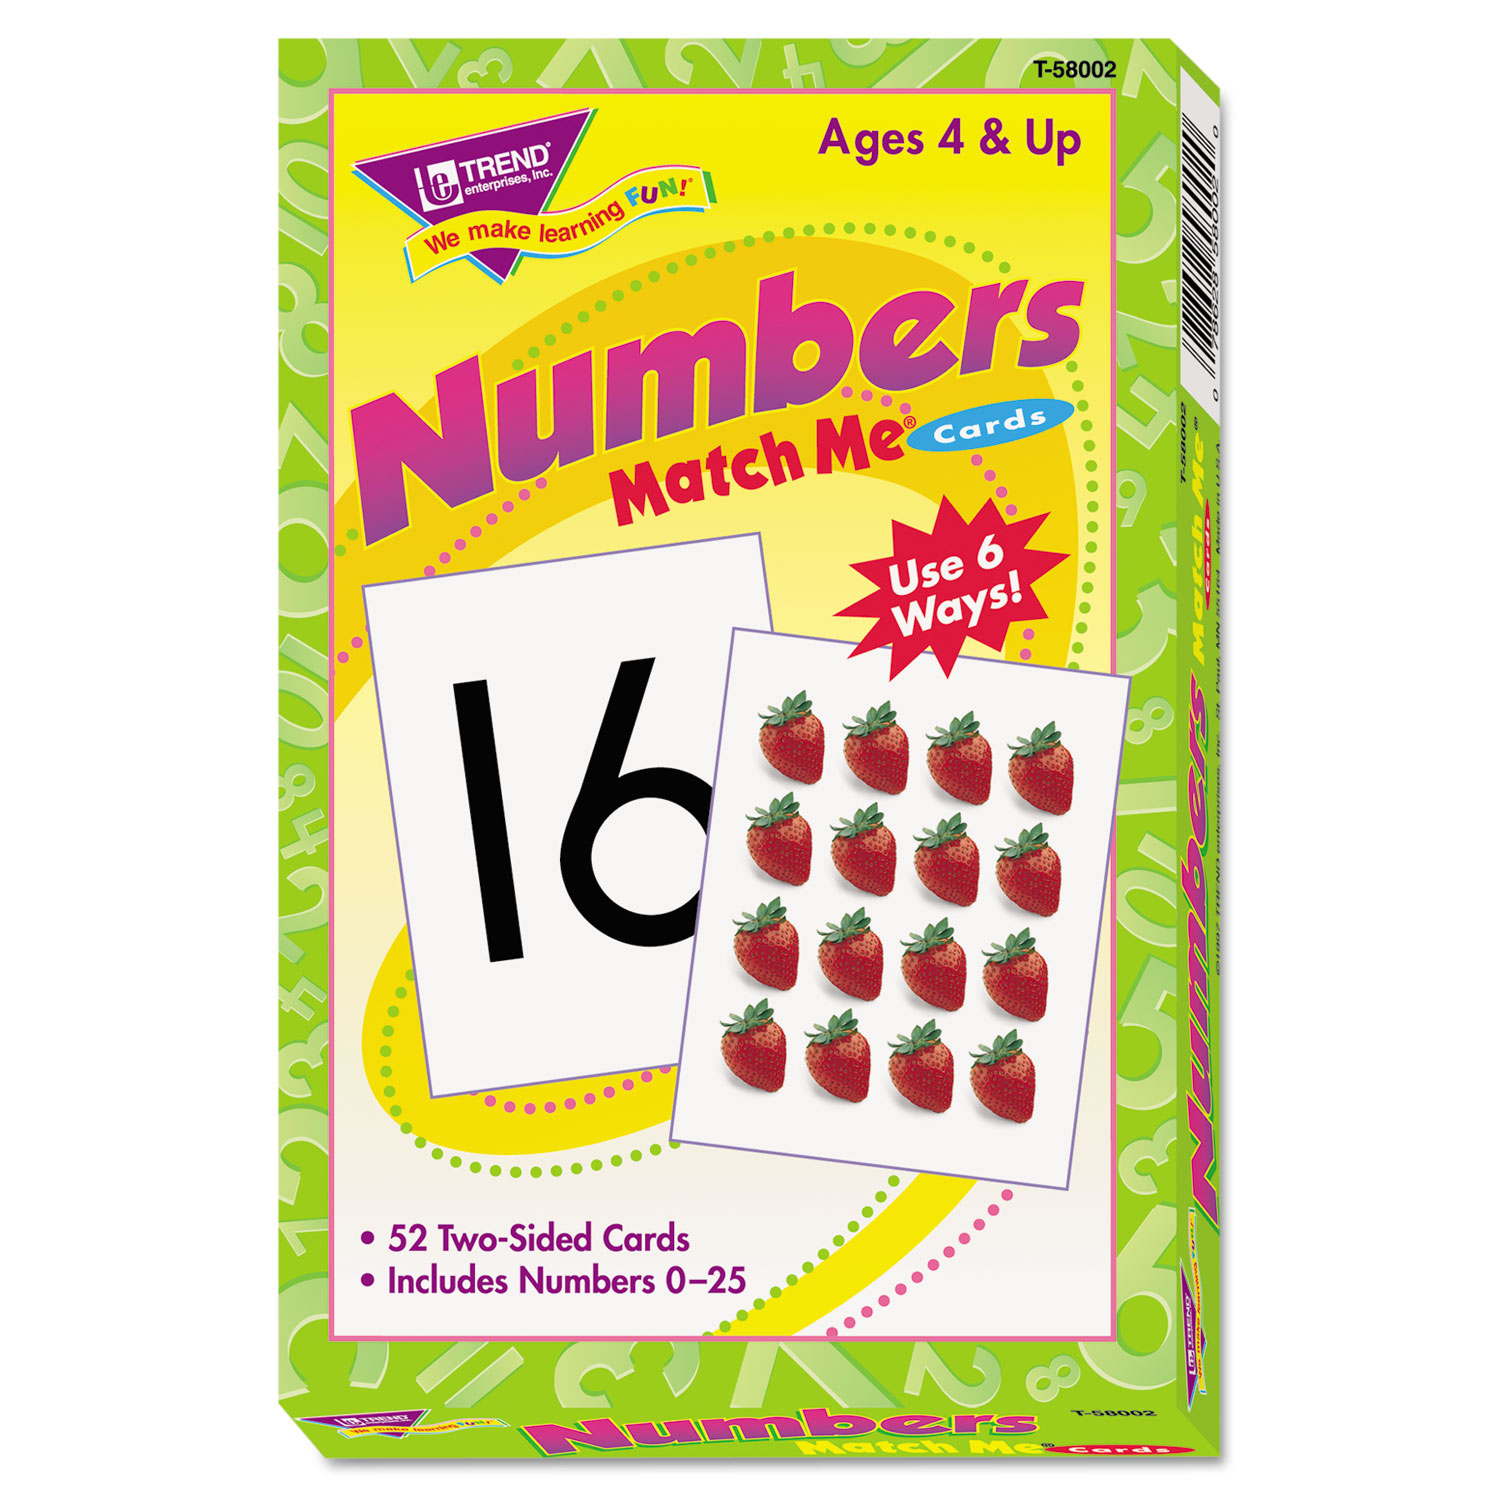 TREND® Match Me Cards, Numbers 0-25, 52 Cards, Ages 4 and Up